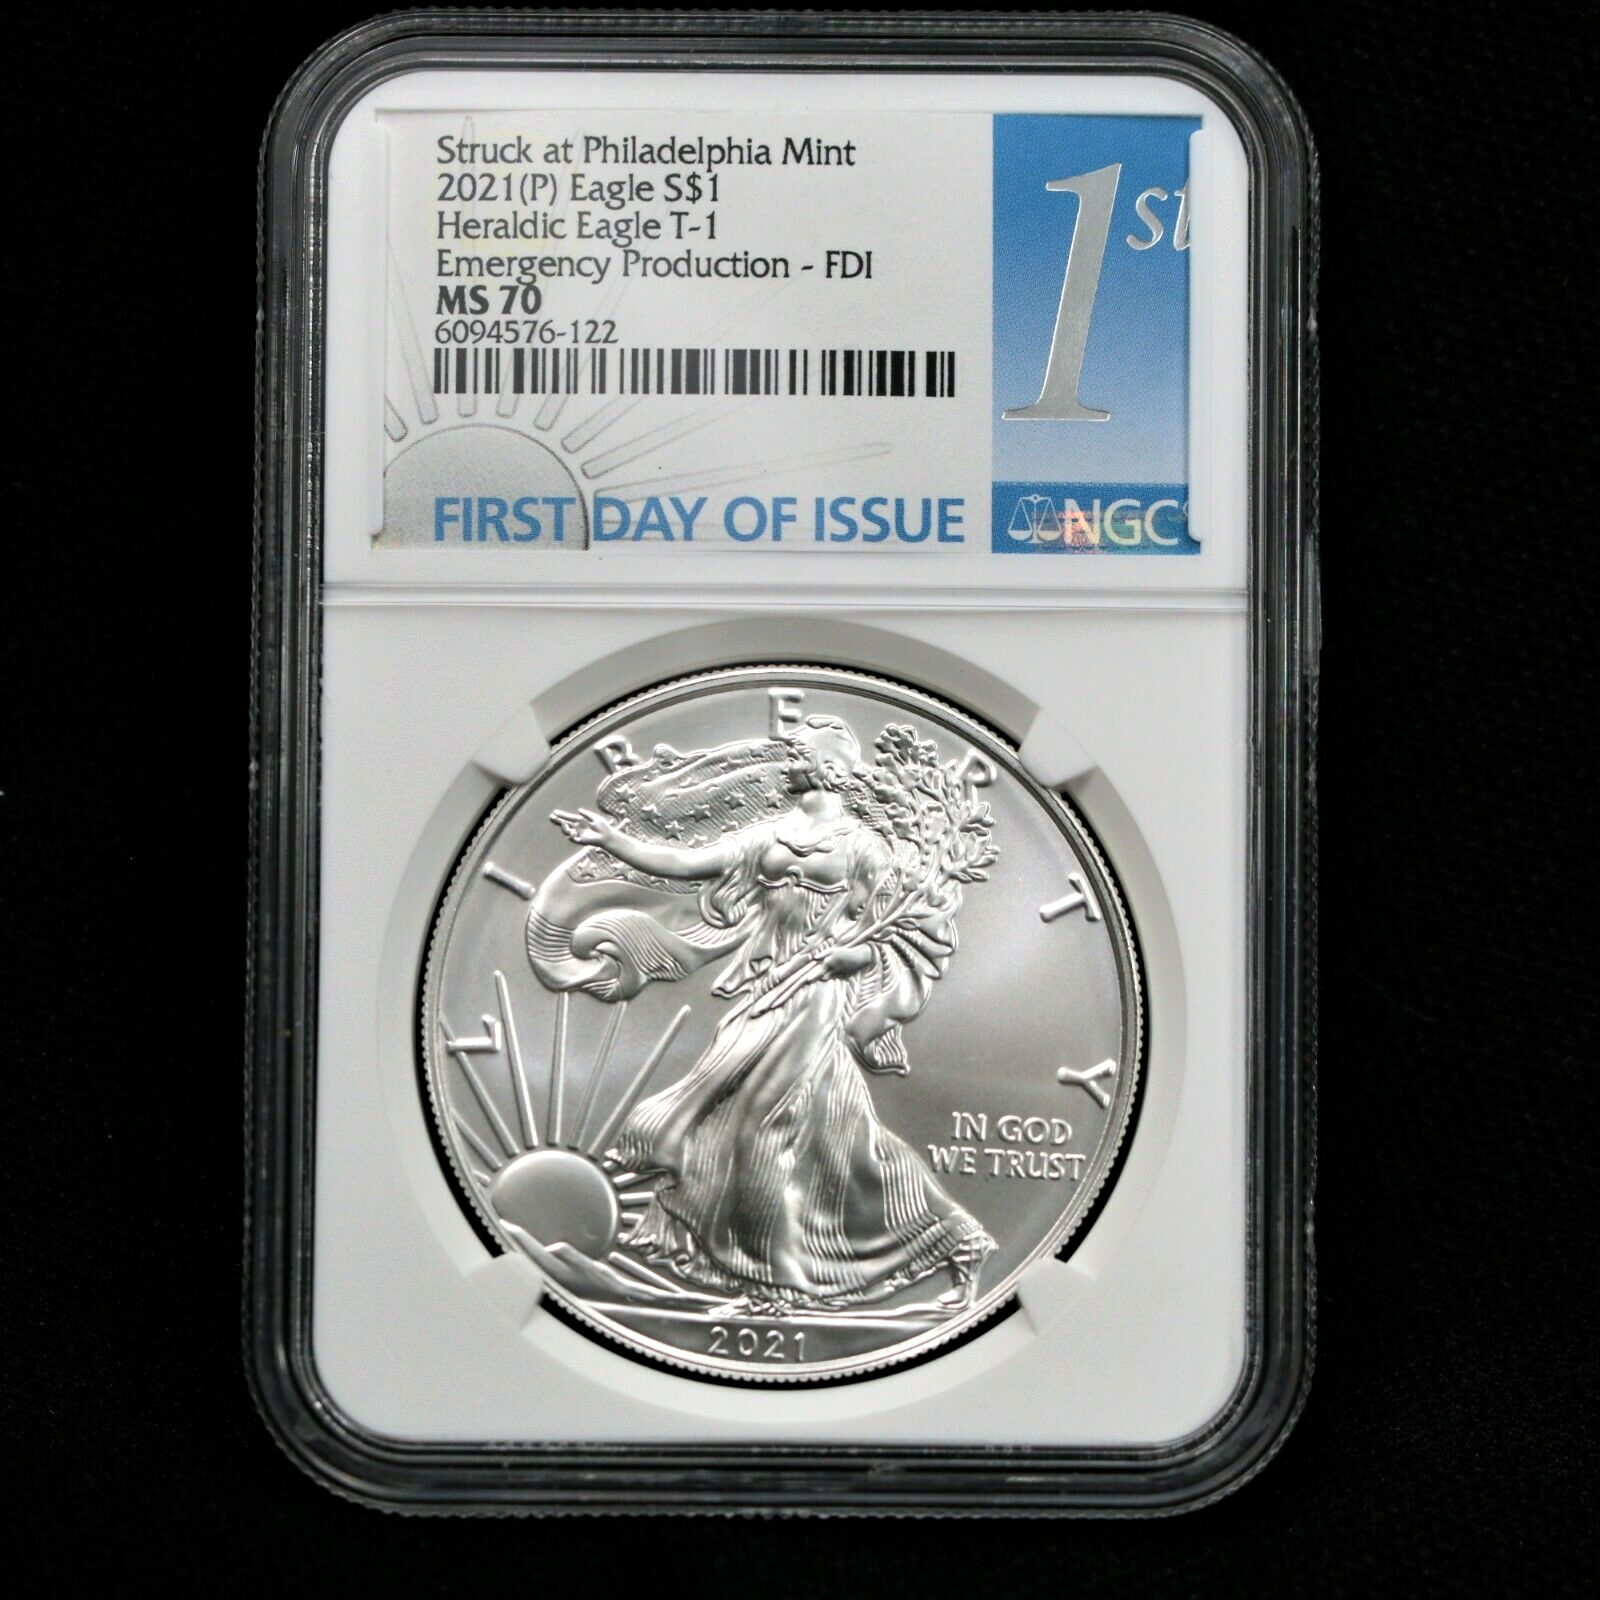 2021 P Emergency Production MS70 Silver Eagle Struck at Philadel